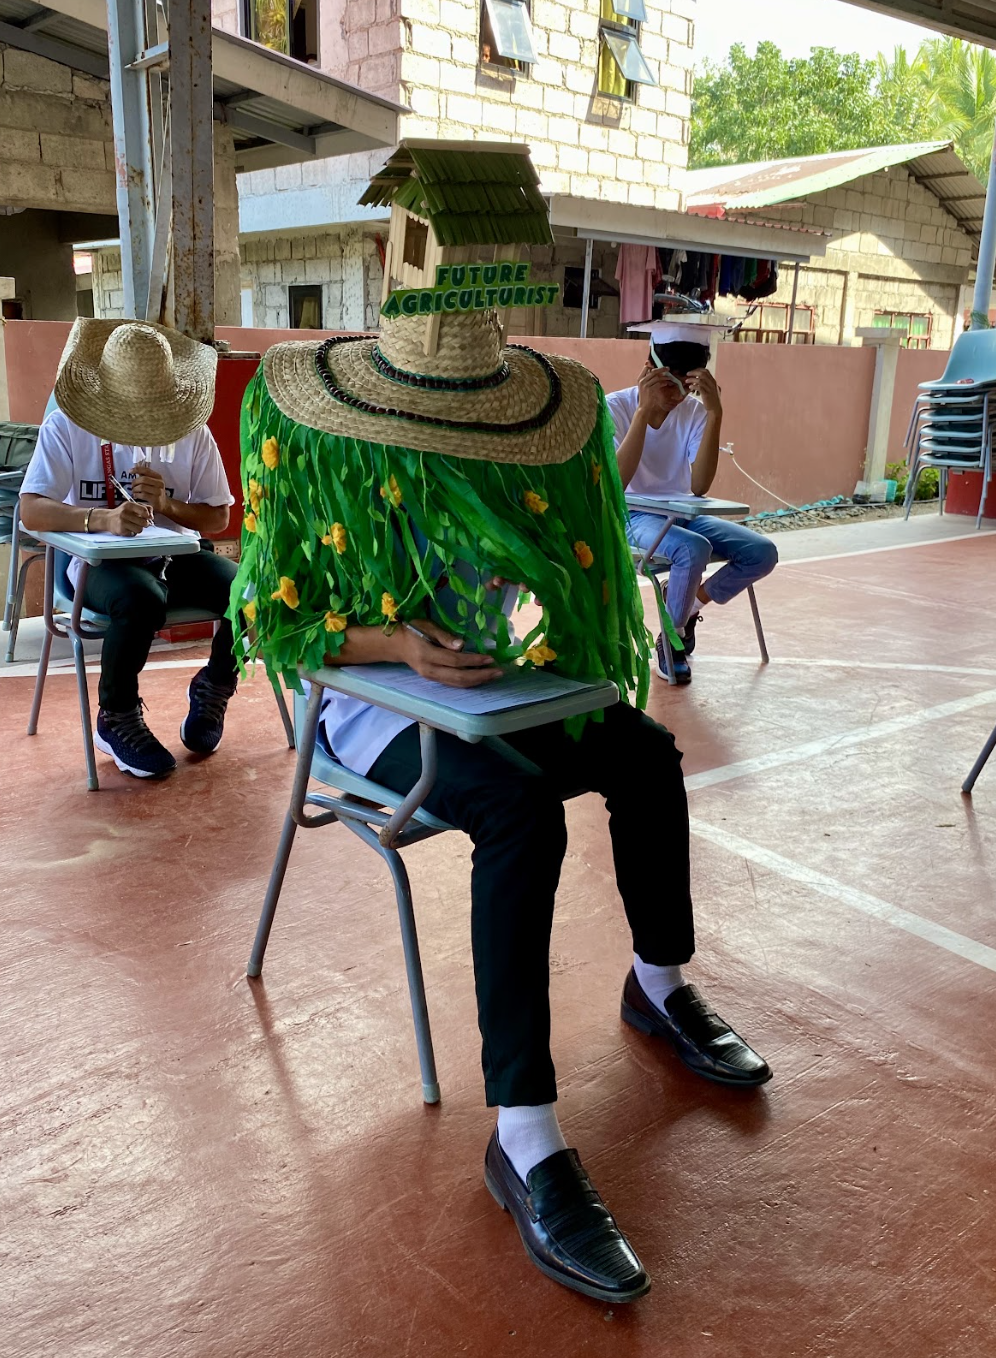 Person seated wearing a large hat with &quot;Future Agriculturist&quot; text